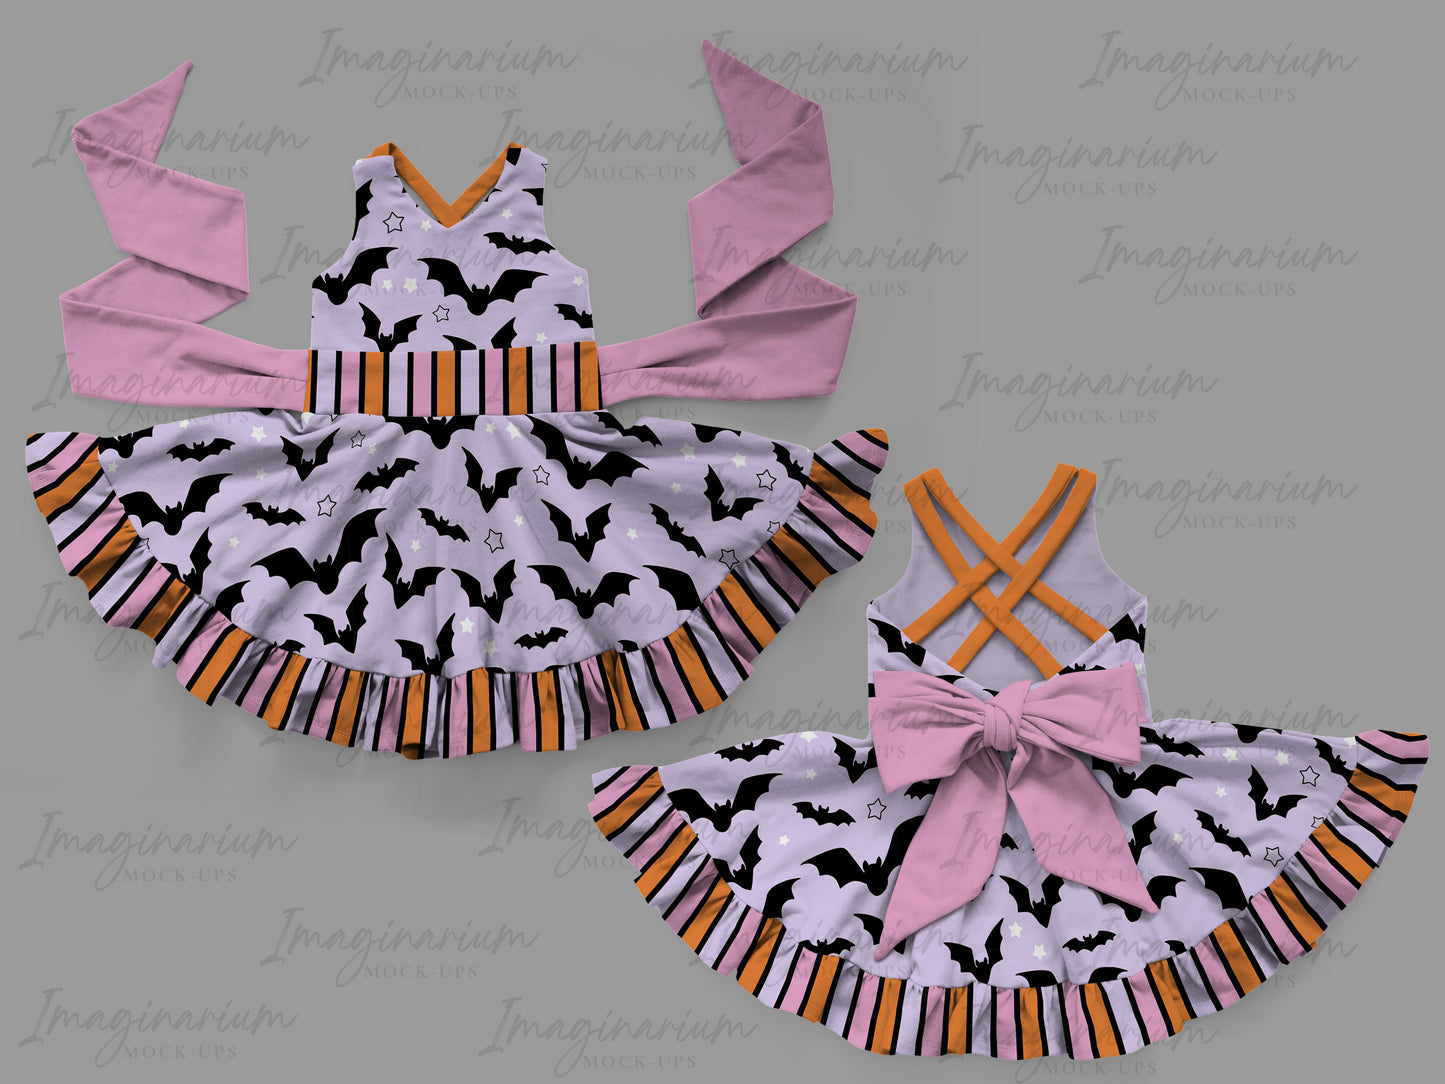 Tigerlily Multi Strap Bow Back Dress Mock Up, Realistic Clothing Mockup for Photoshop and Procreate